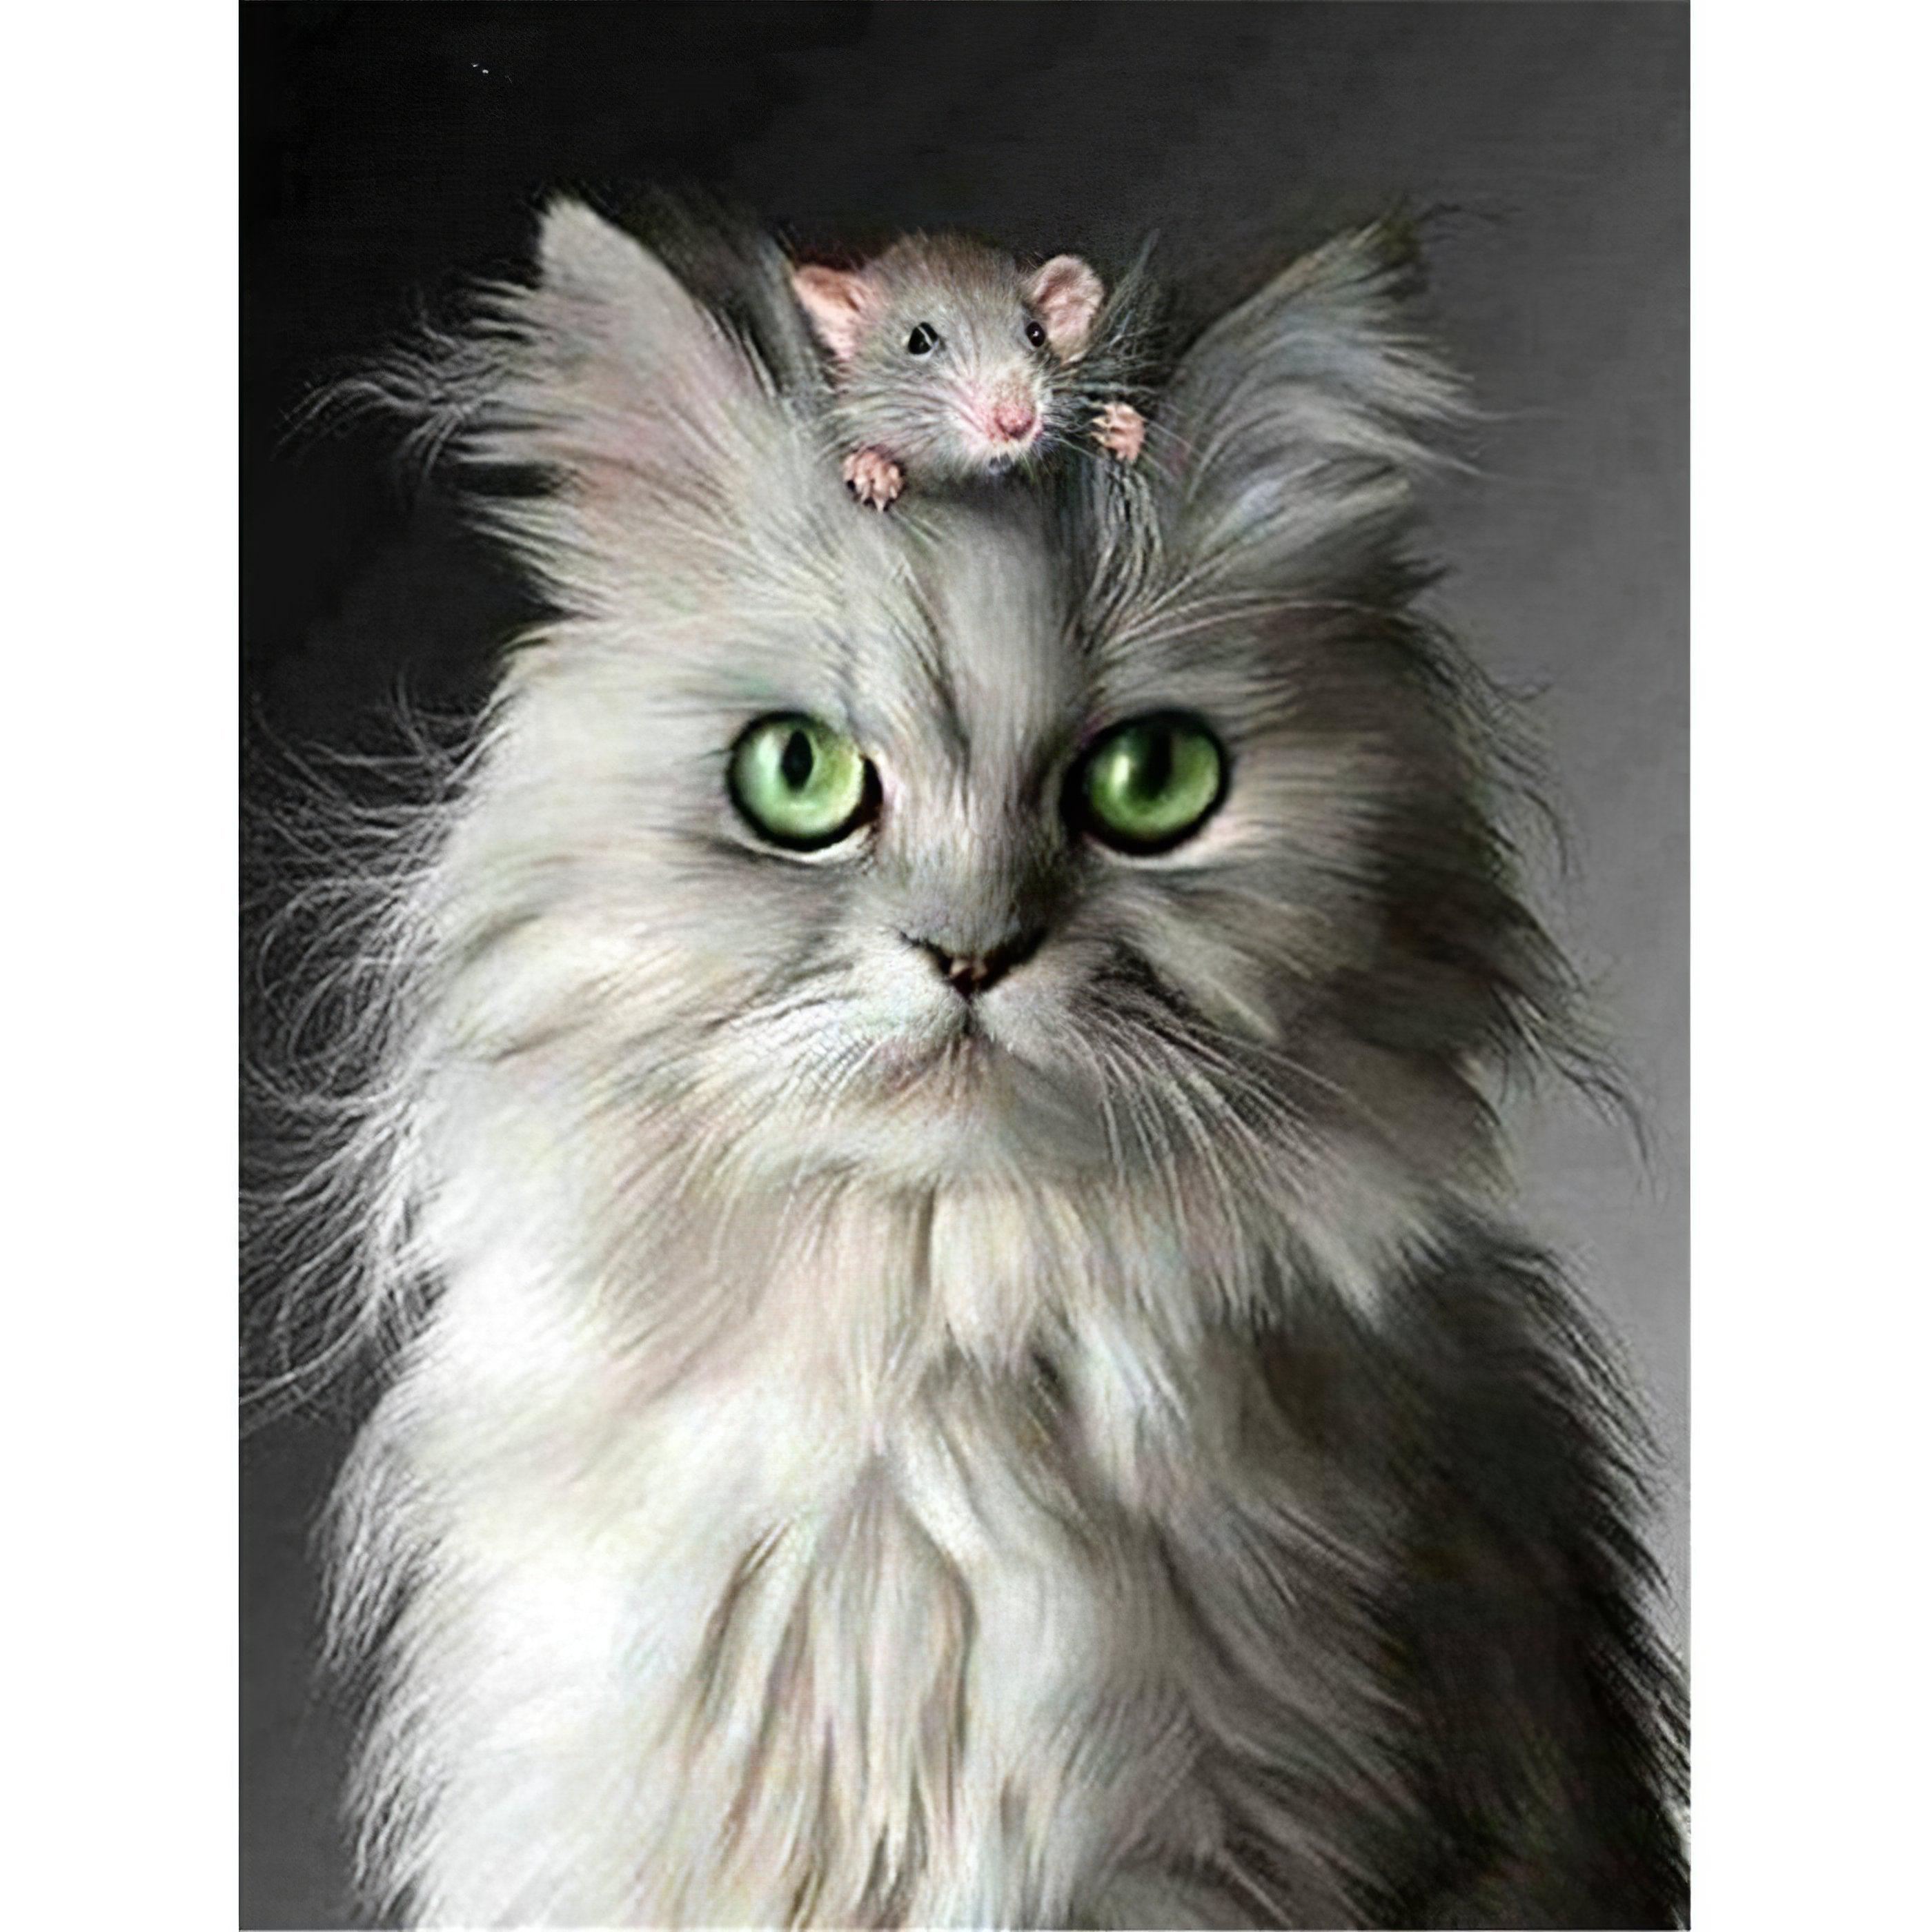 Angry Cat with The Rat: A whimsical chase frozen in time Angry Cat With The Rat - Diamondartlove